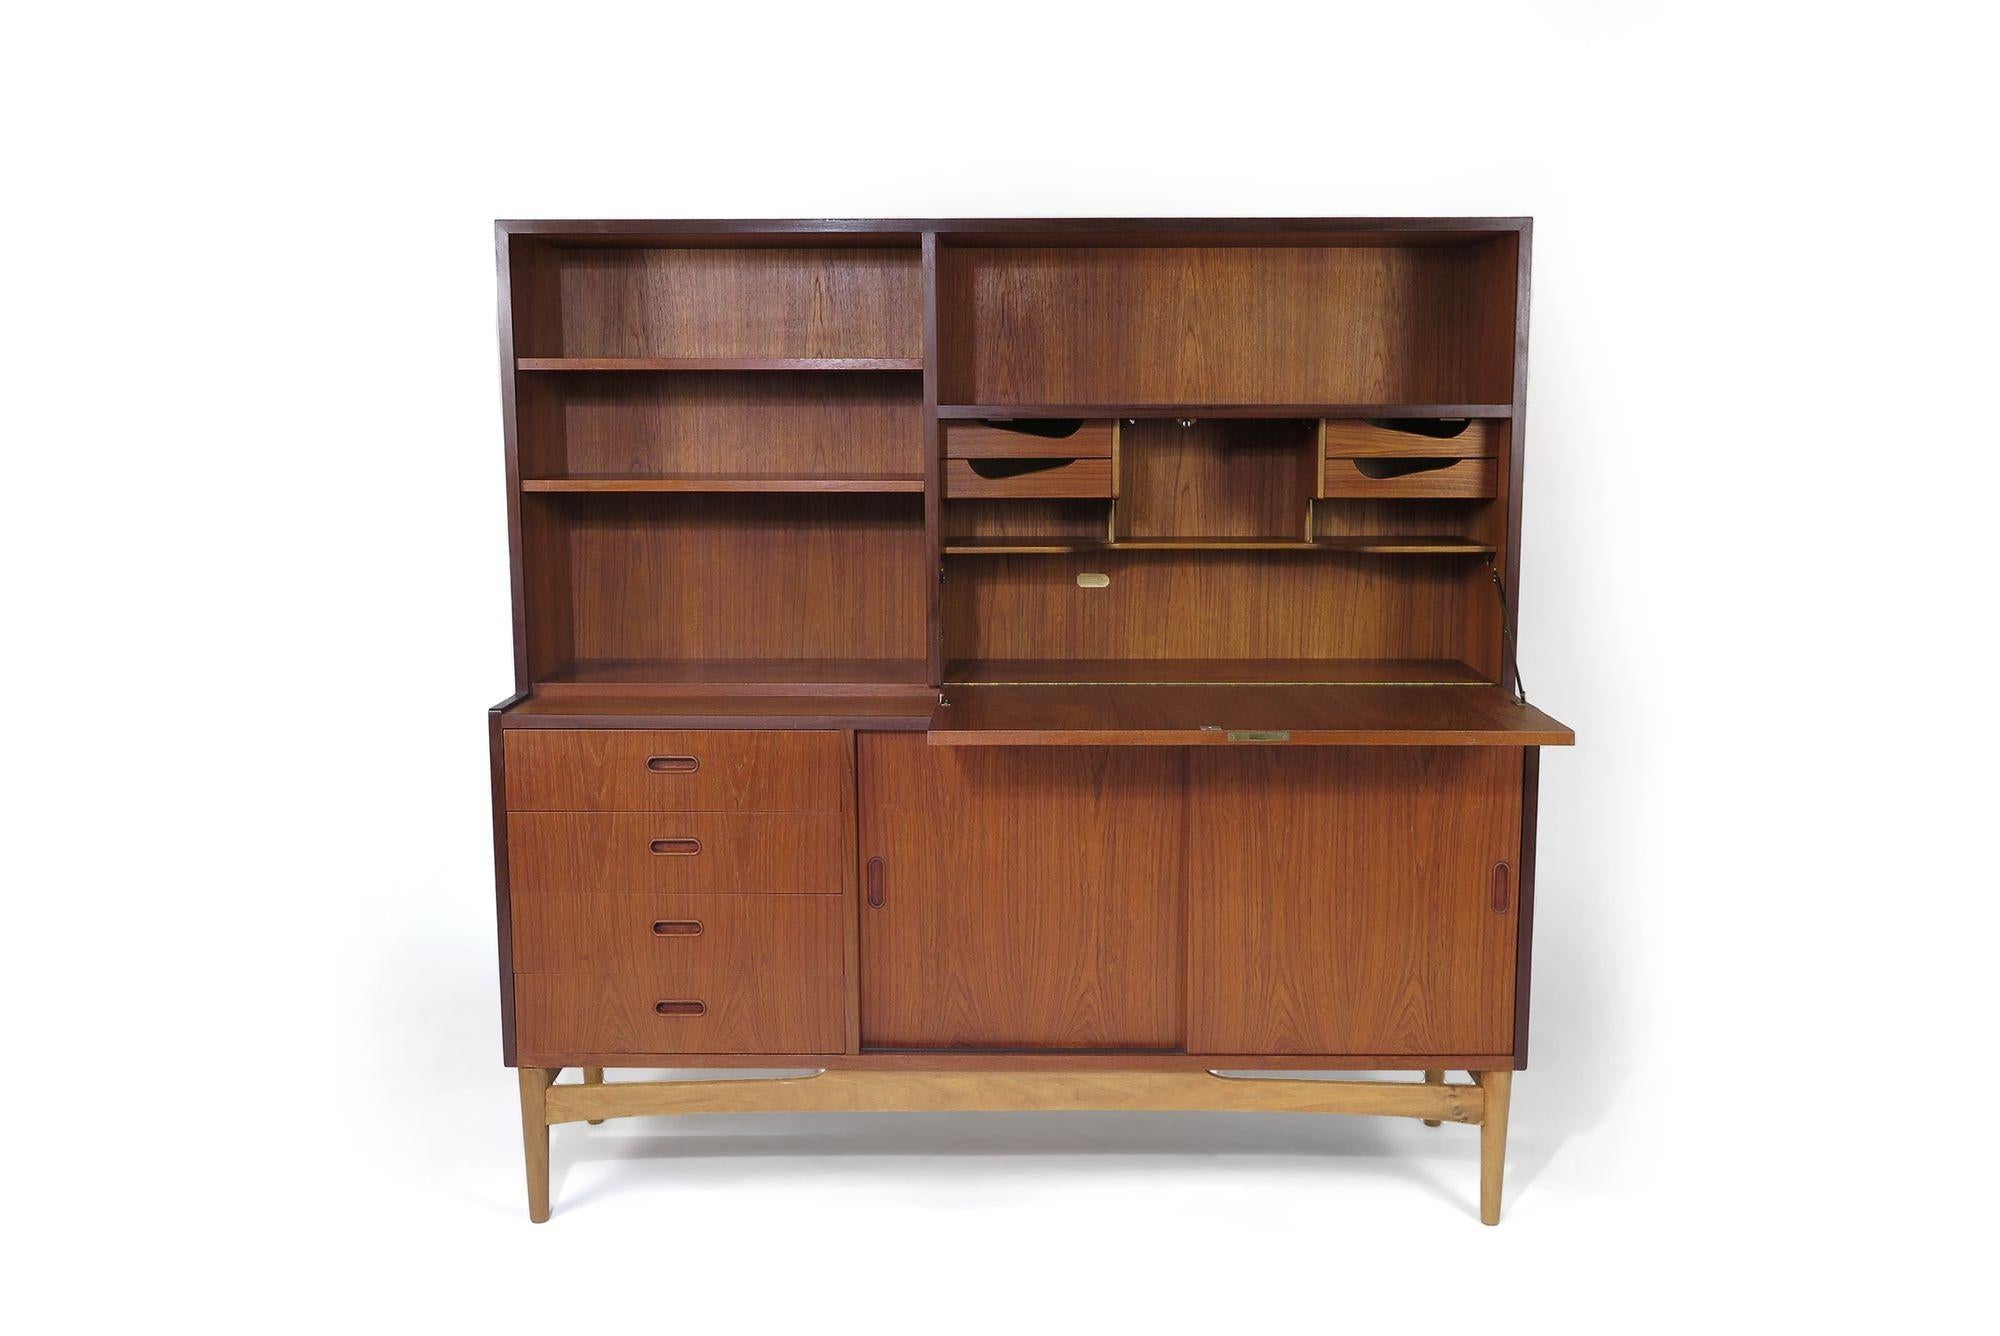 1960s Danish Teak High Sideboard Cabinet In Excellent Condition For Sale In Oakland, CA